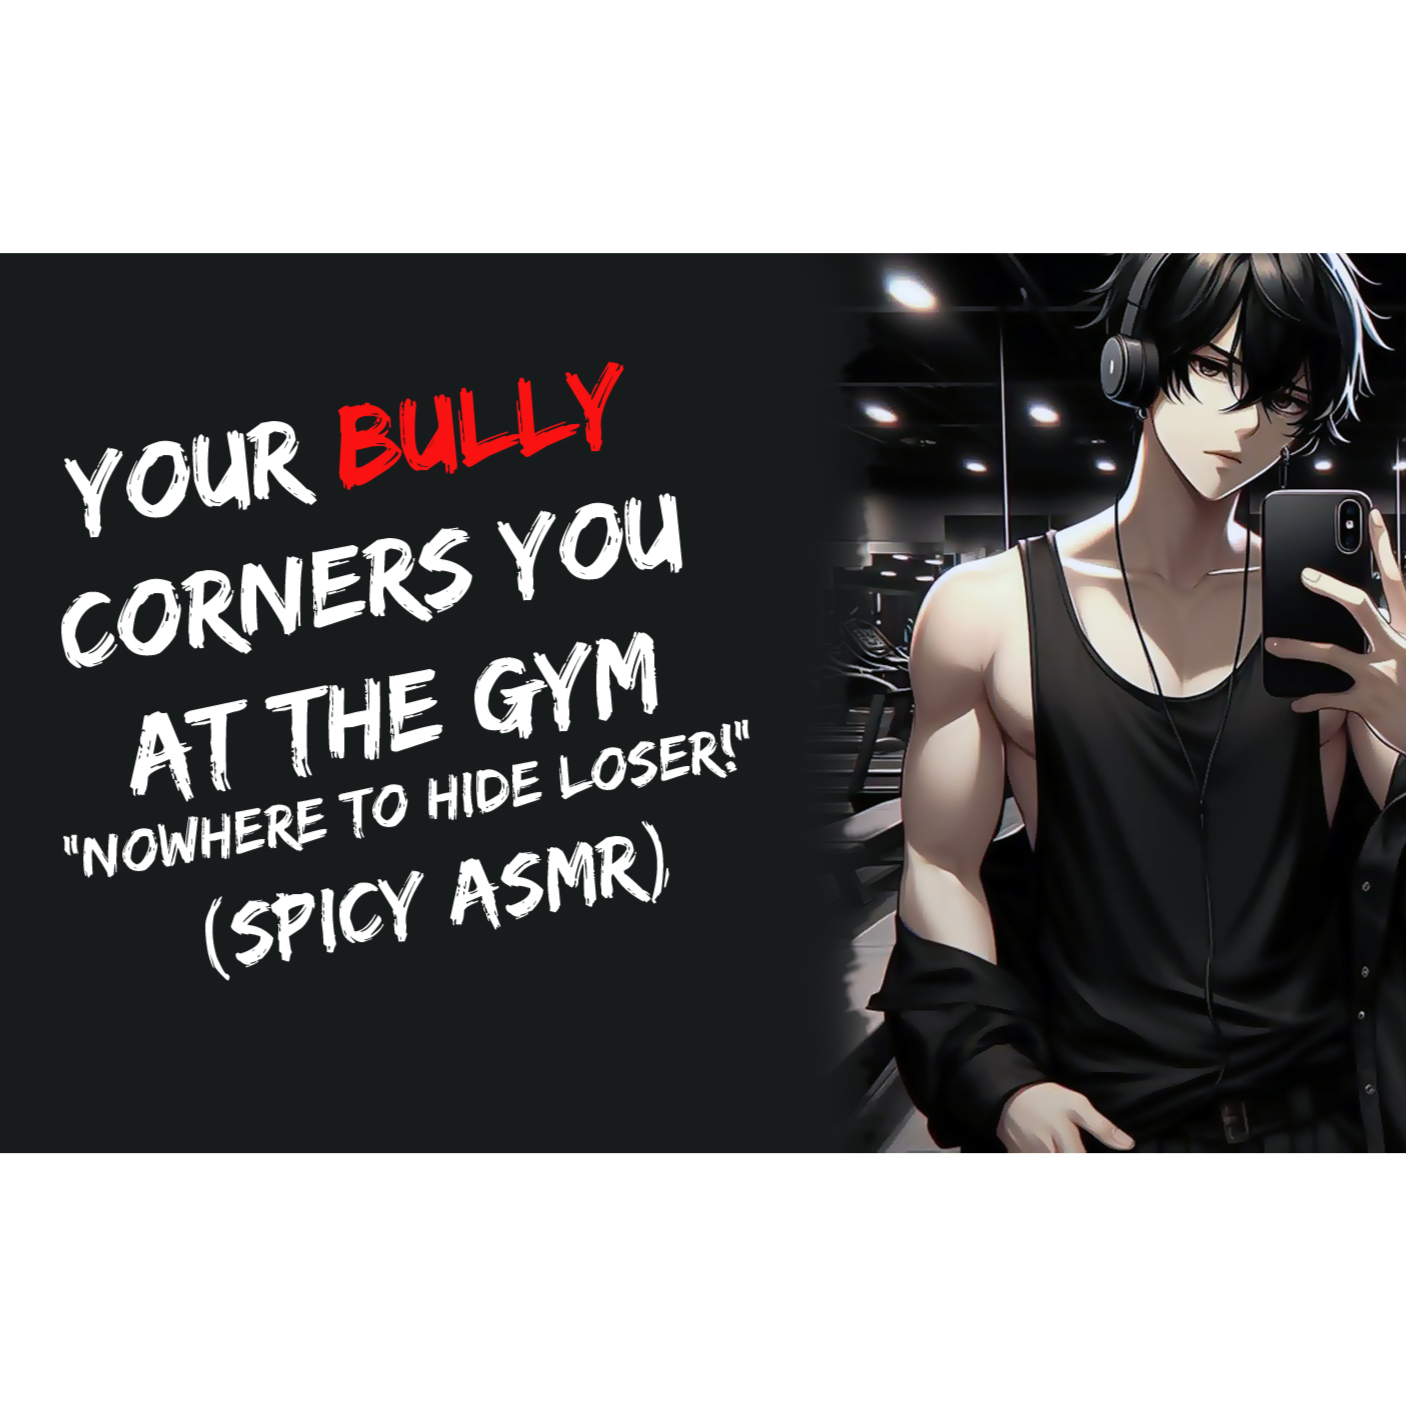 Your Bully Corners You At The Gym "Nowhere To Hide Loser!" (Spicy ASMR)